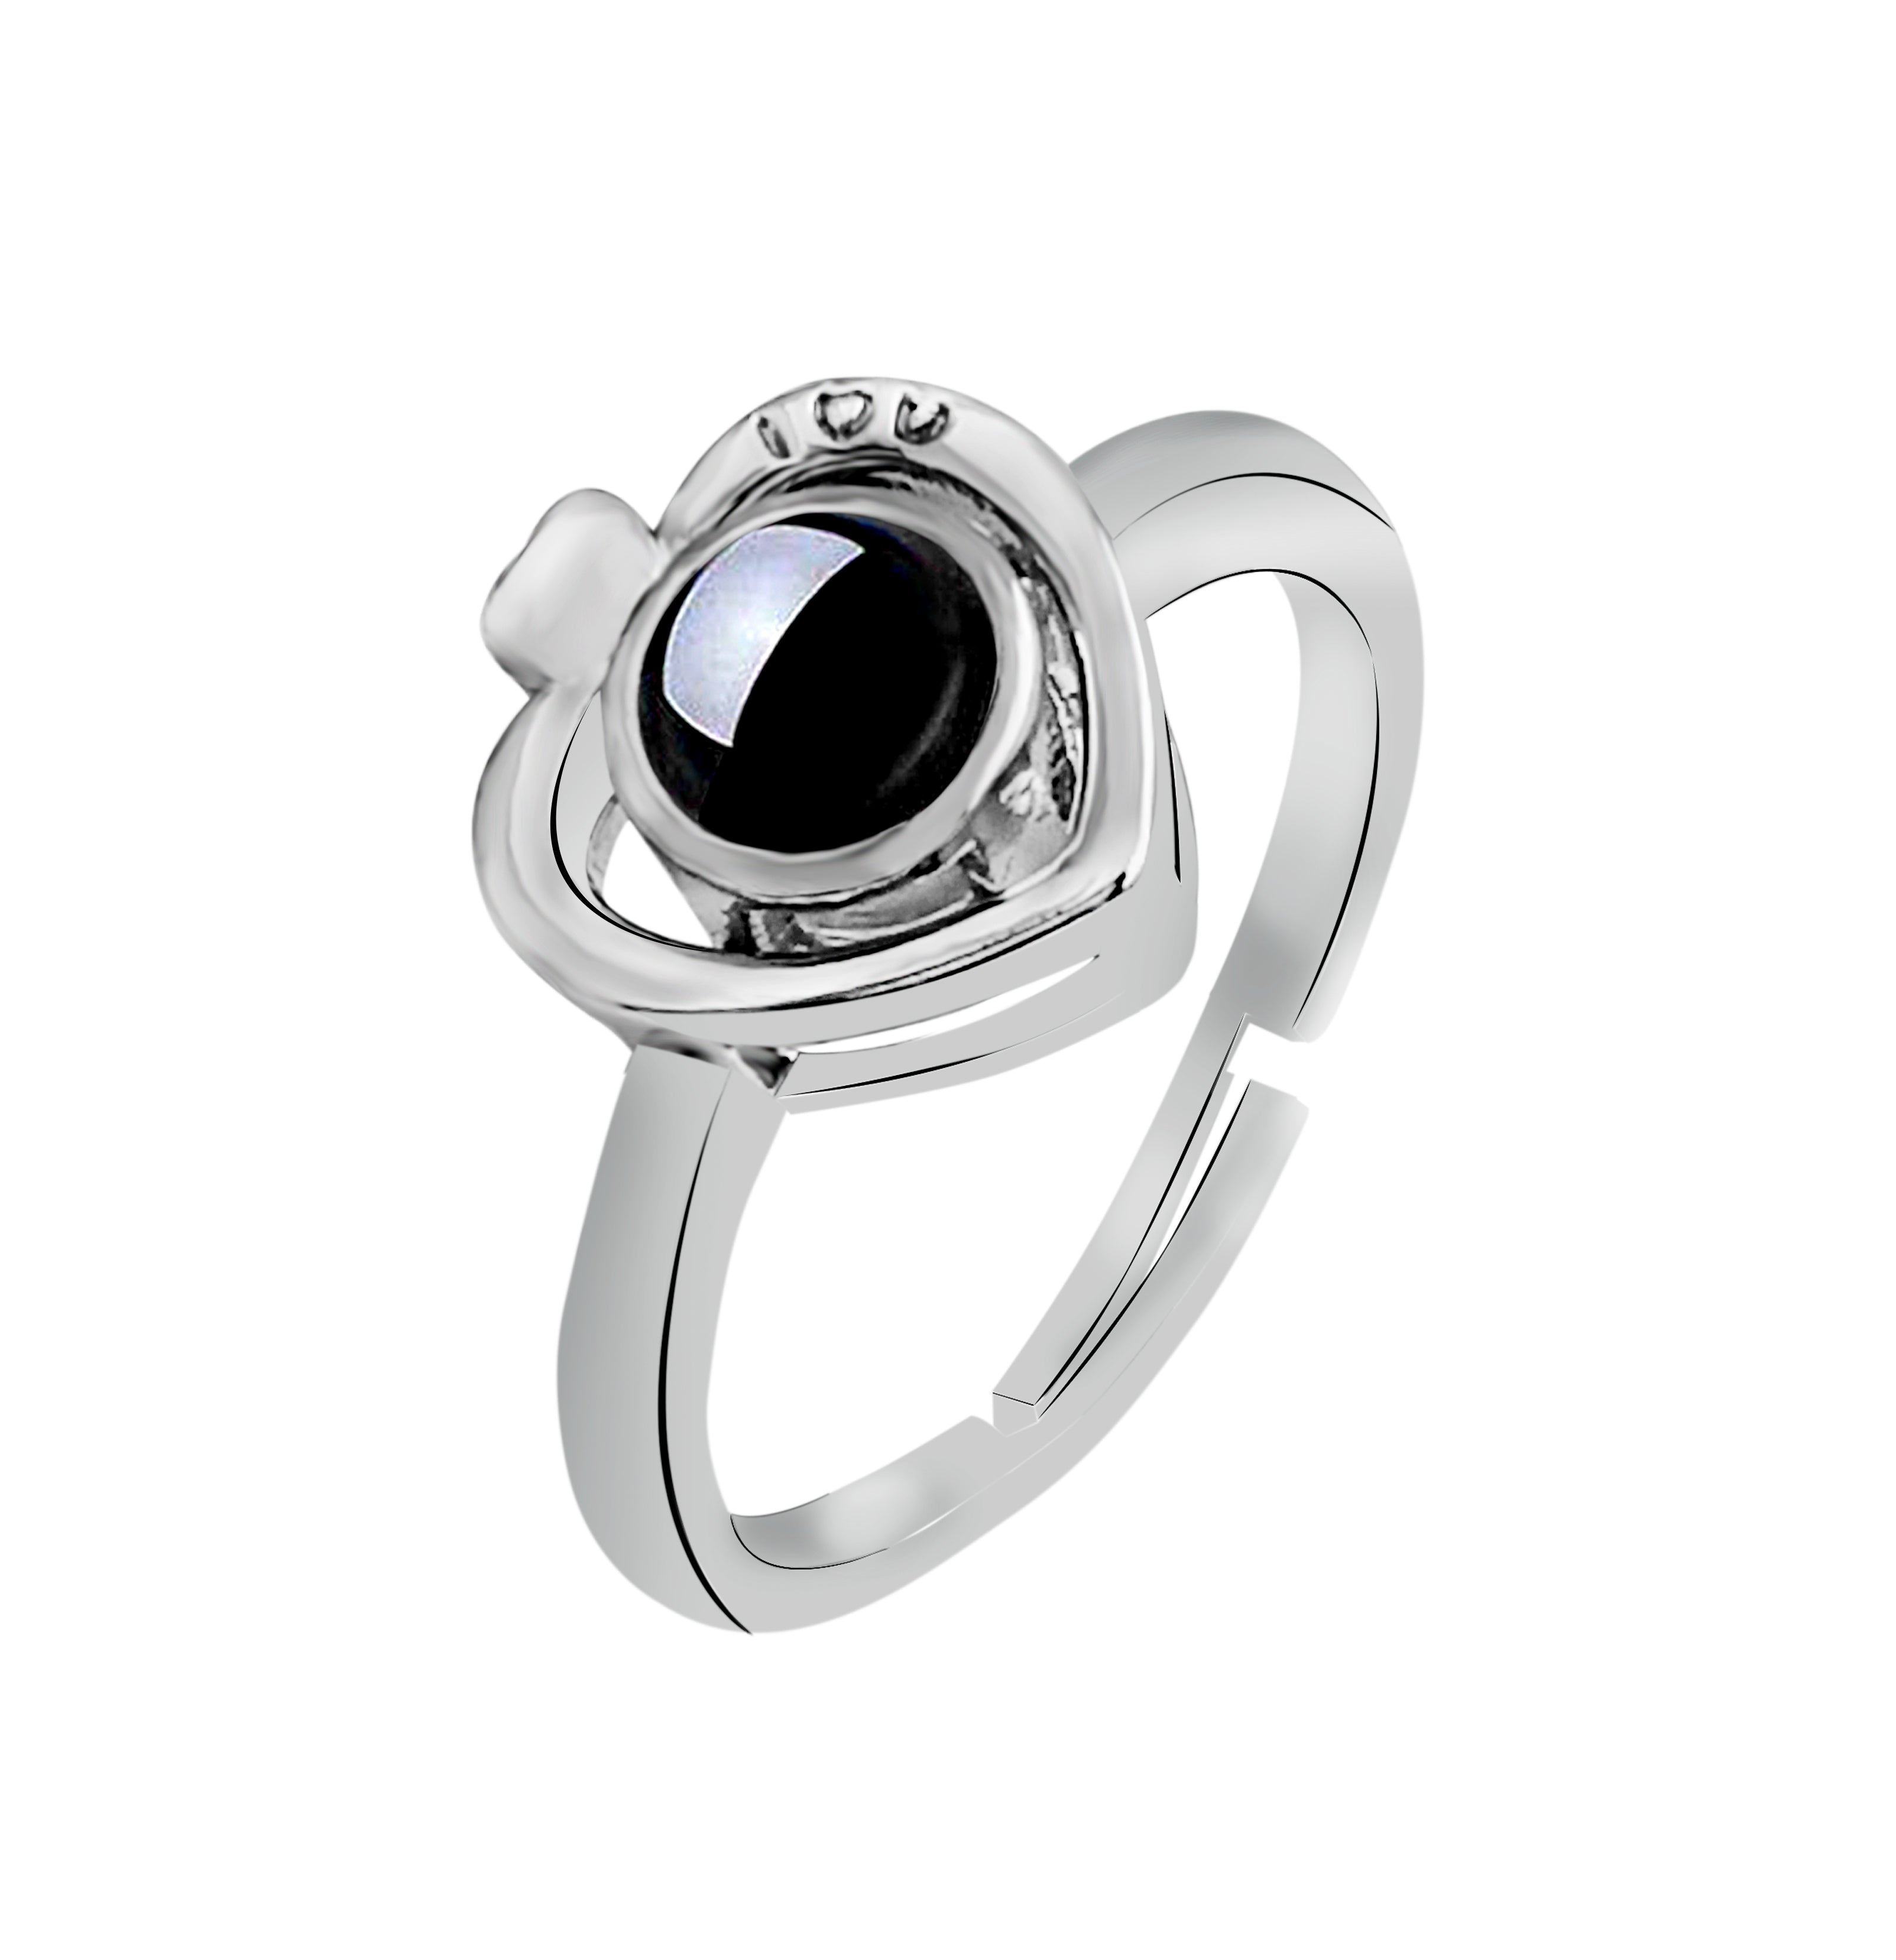 Urbana Heart Shaped Silver Plated Single Adjustable Ring Reflecting I love you In 100 Languages